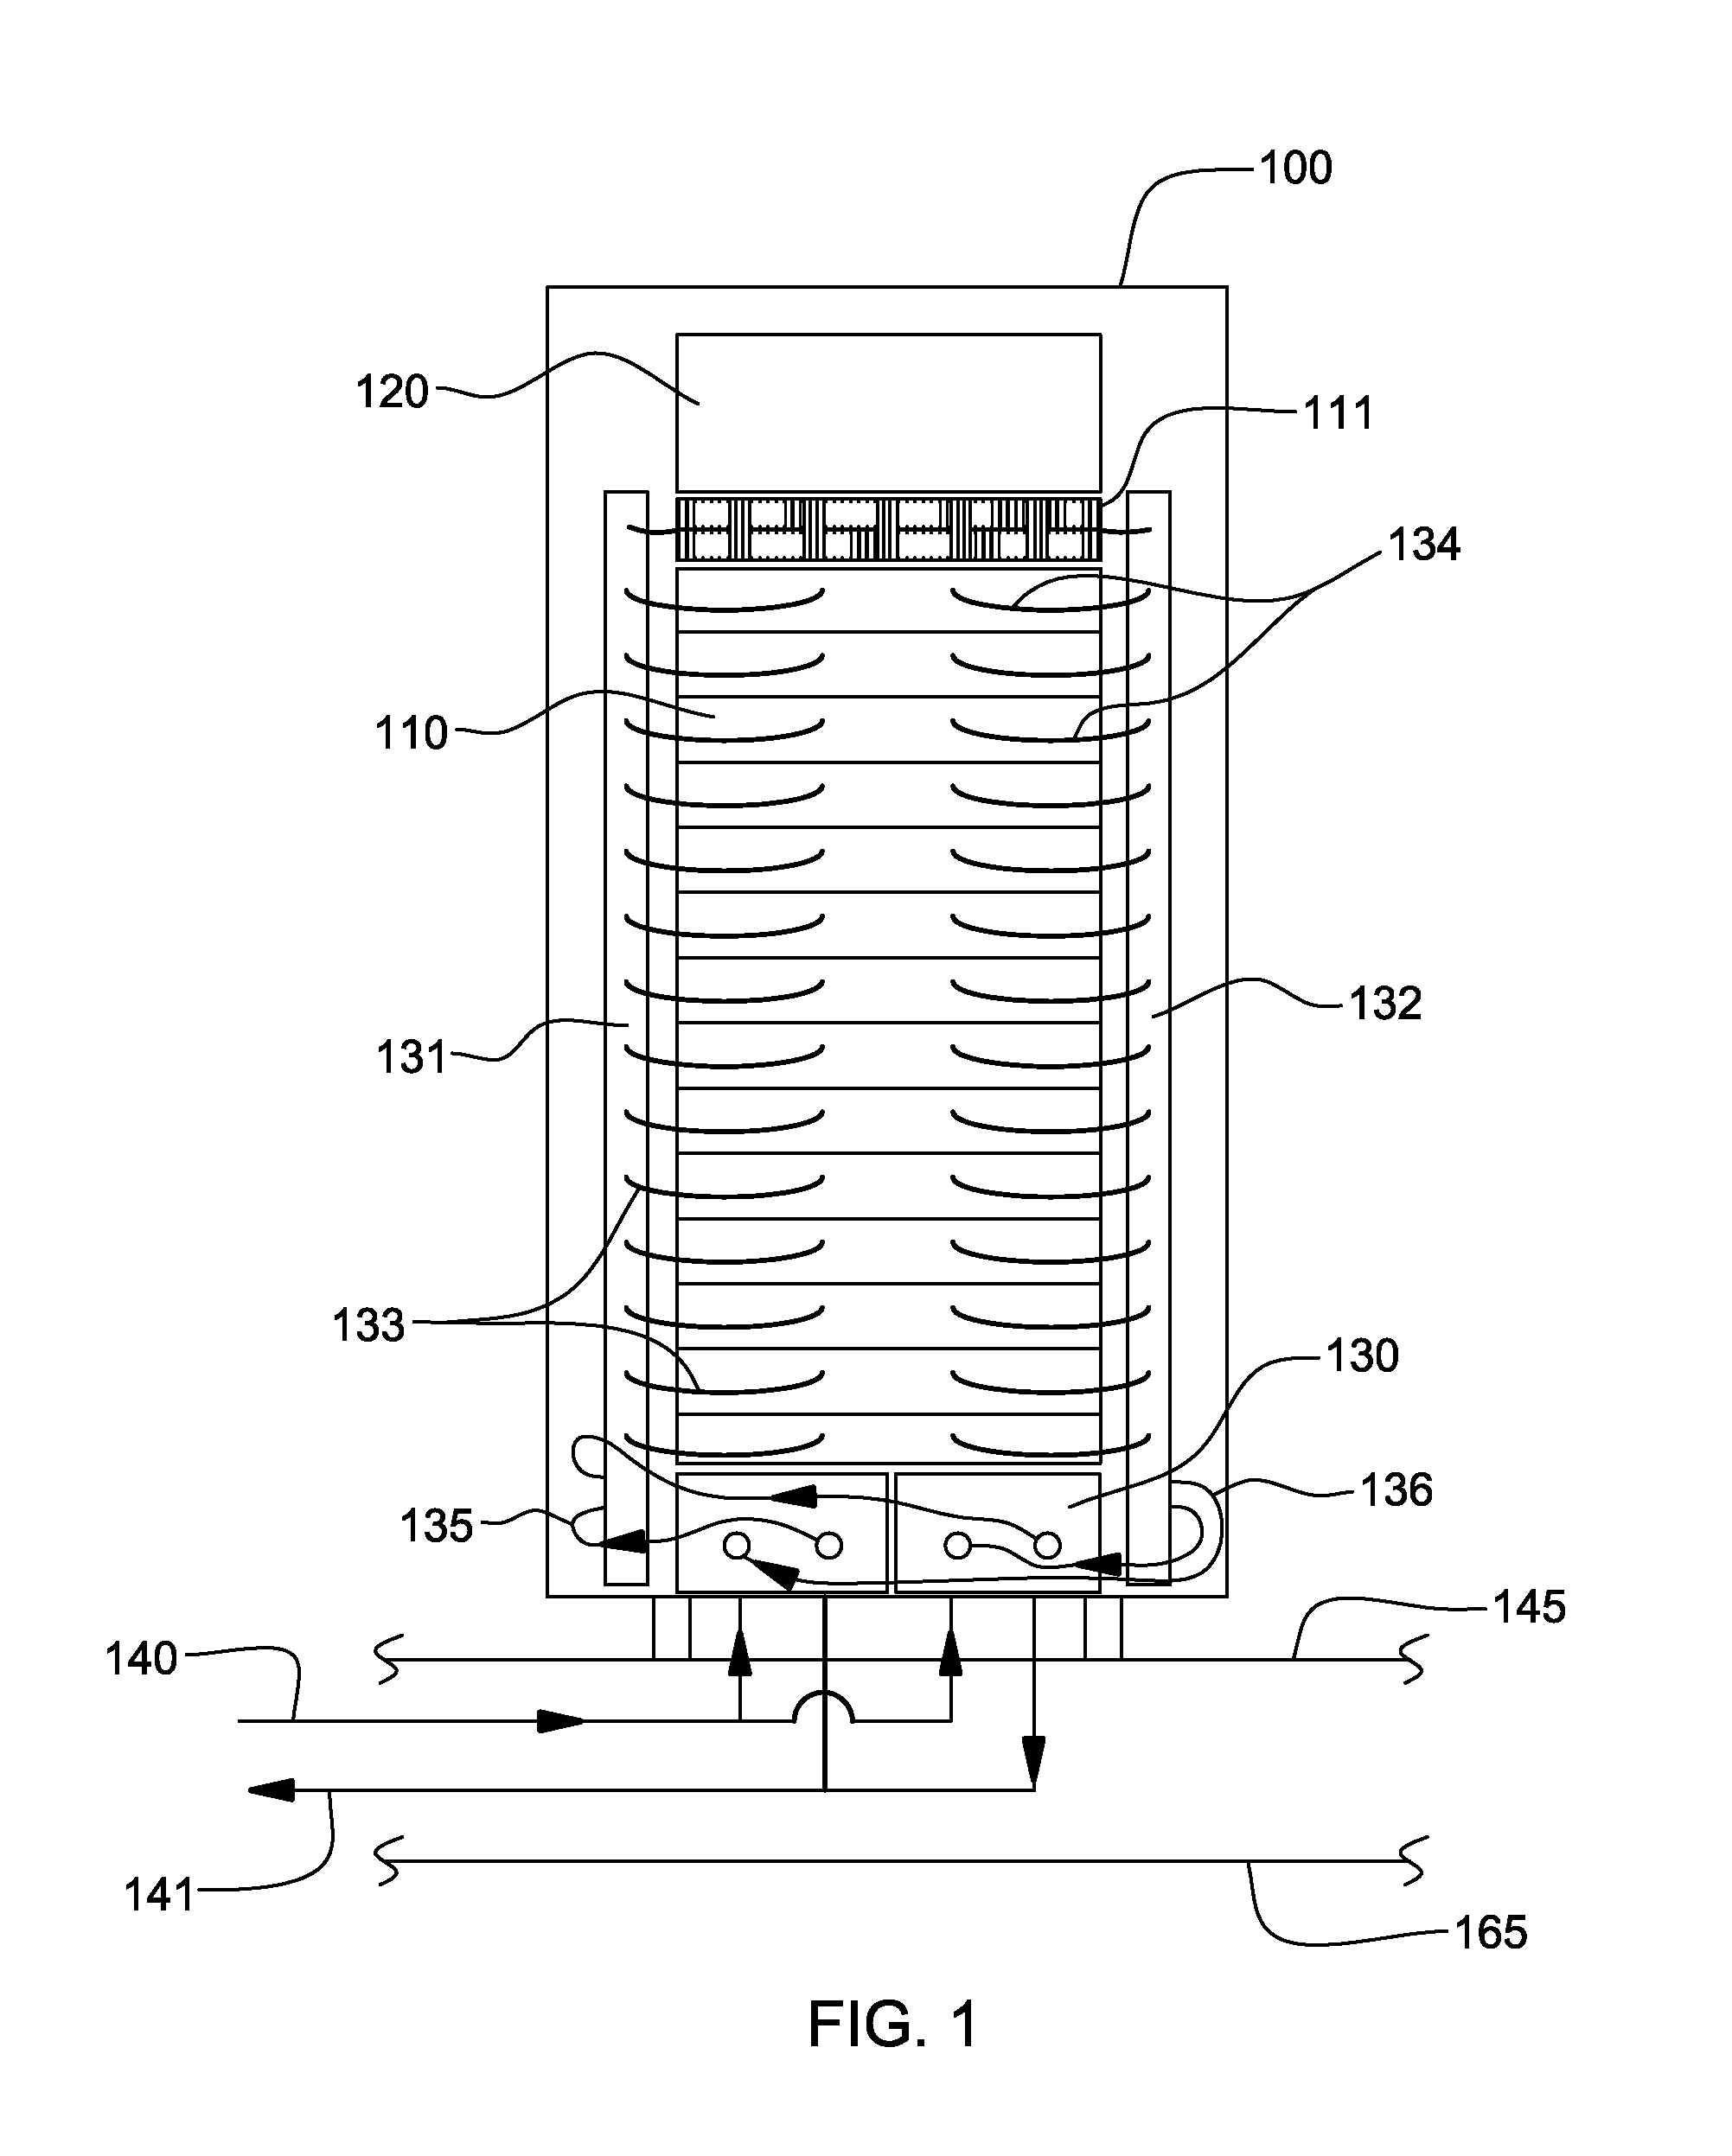 Valve controlled, node-level vapor condensation for two-phase heat sink(s)